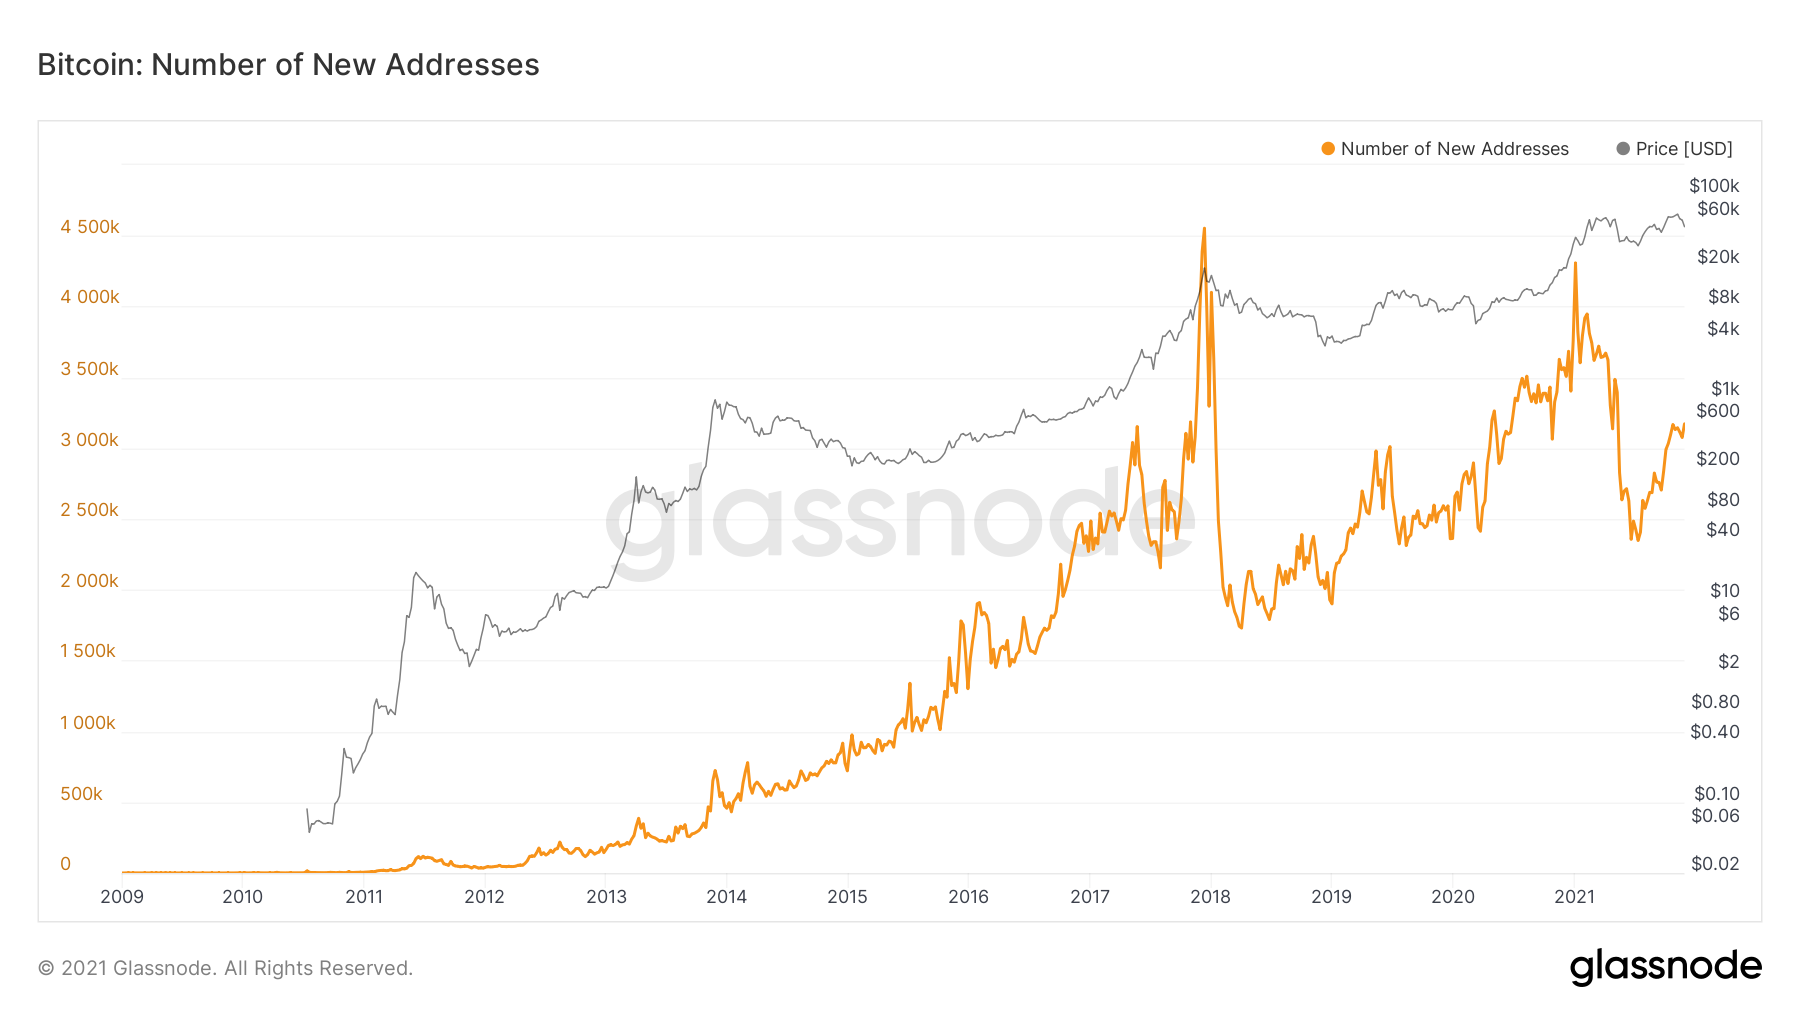 Bitcoin: Number of New Addresses